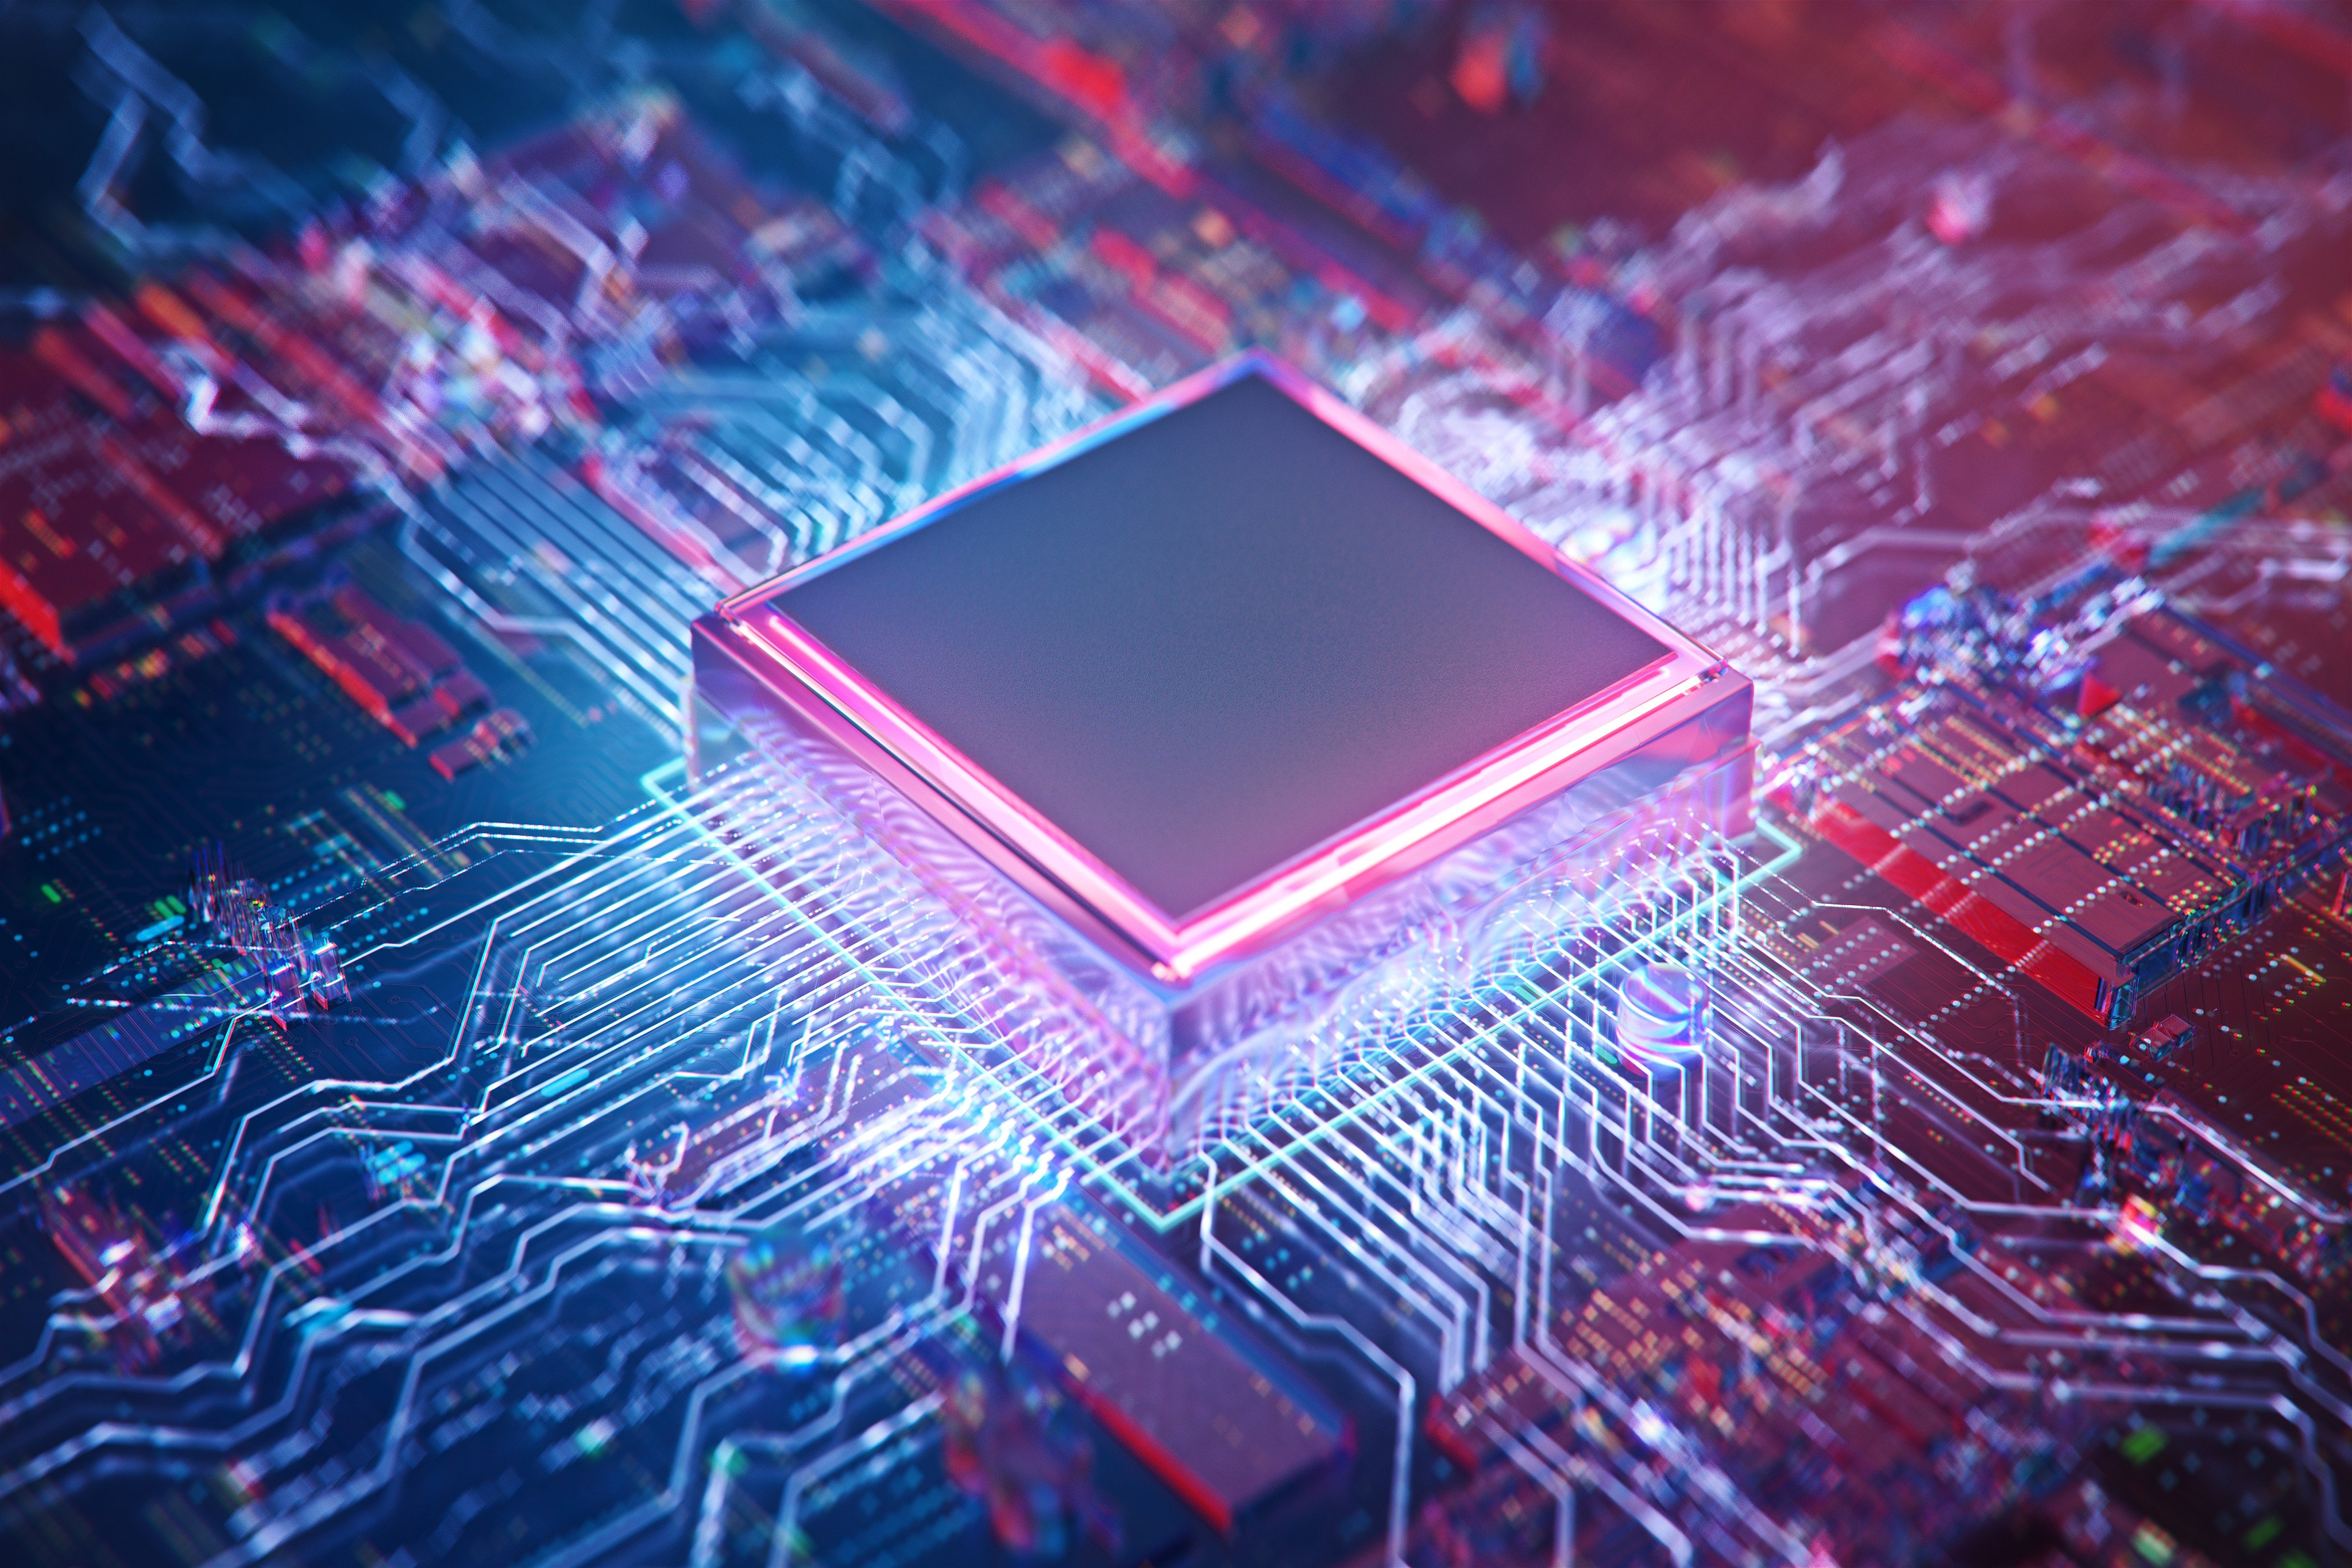 Researchers are in race to develop energy-efficient chips for AI tasks. Photo: Shutterstock